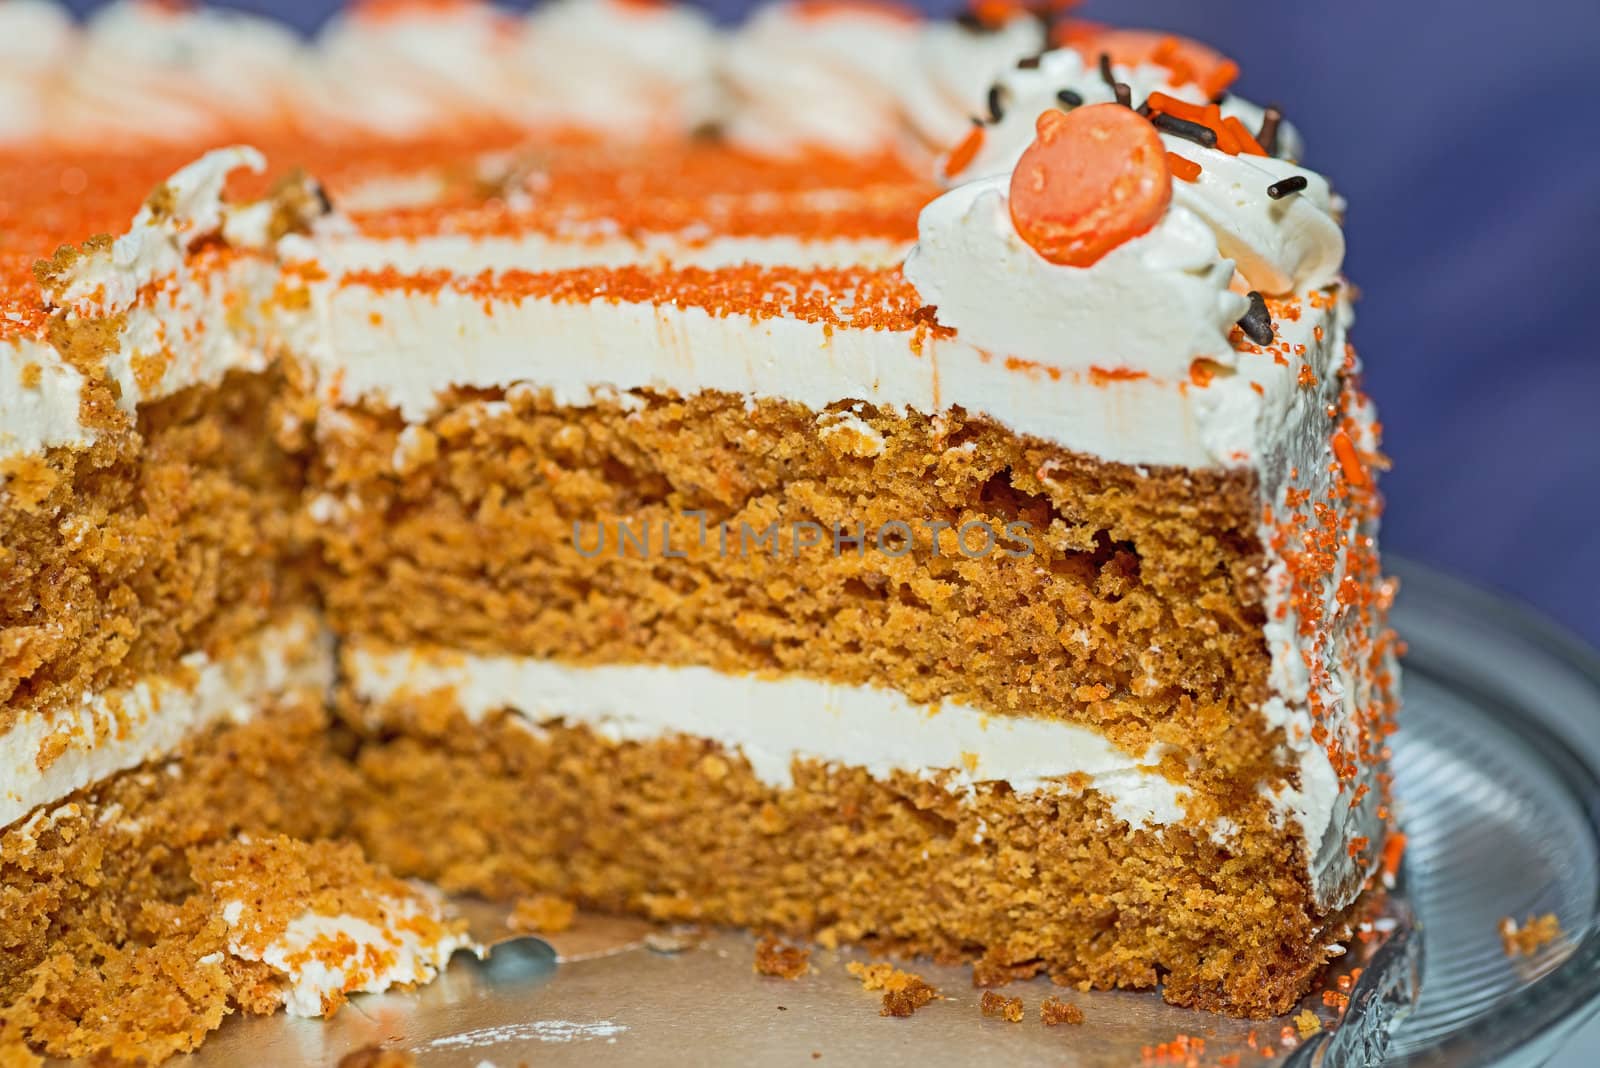 Carrot cake by Marcus